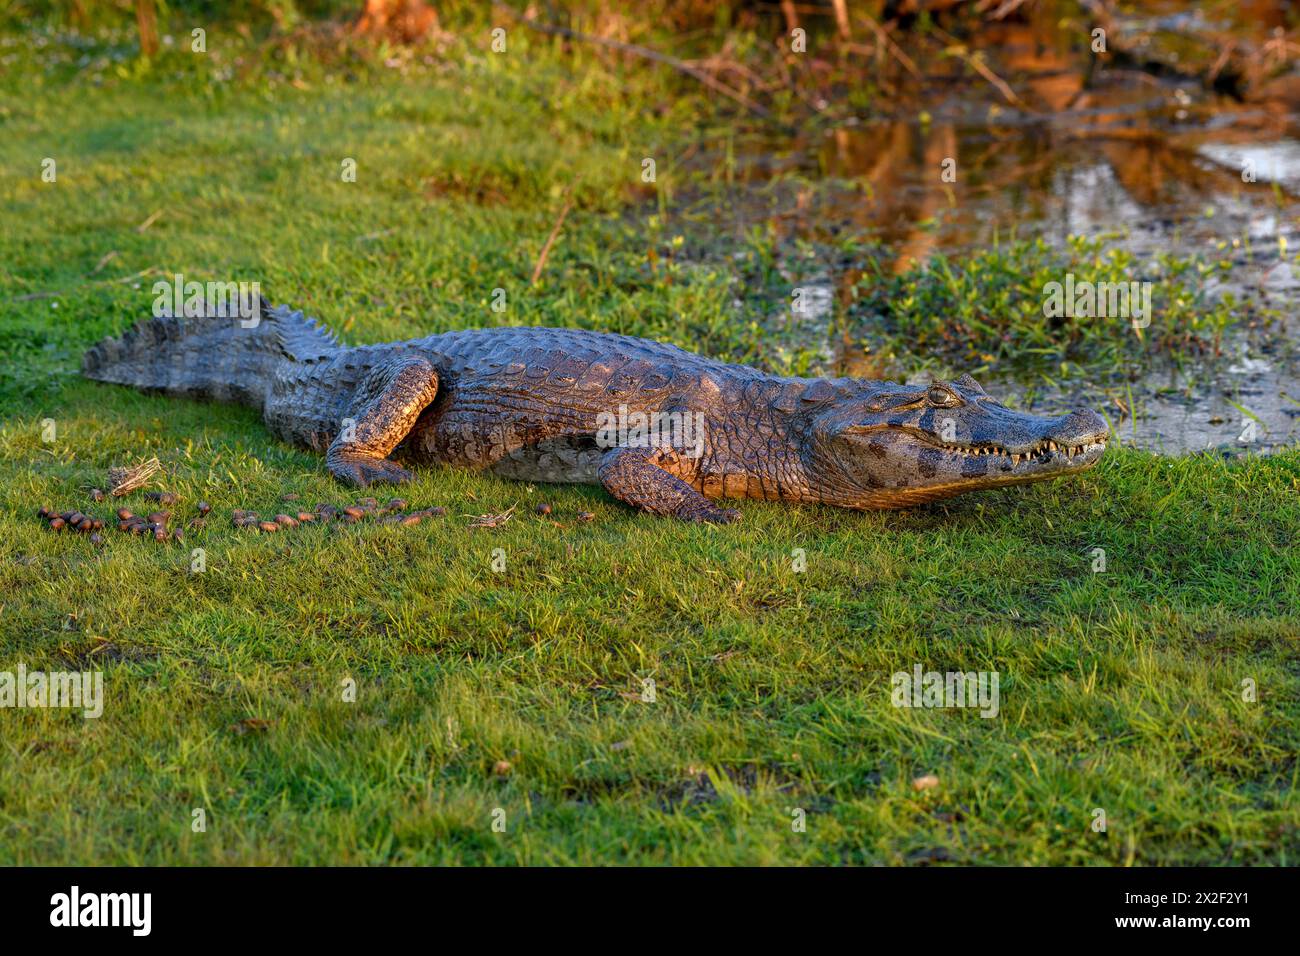 Zoologie, Reptil (Reptilia), brauner Kaiman (Caiman yacare oder Caiman crocodilus yacara), mit Cambyretá, ADDITIONAL-RIGHTS-CLEARANCE-INFO-NOT-AVAILABLE Stockfoto